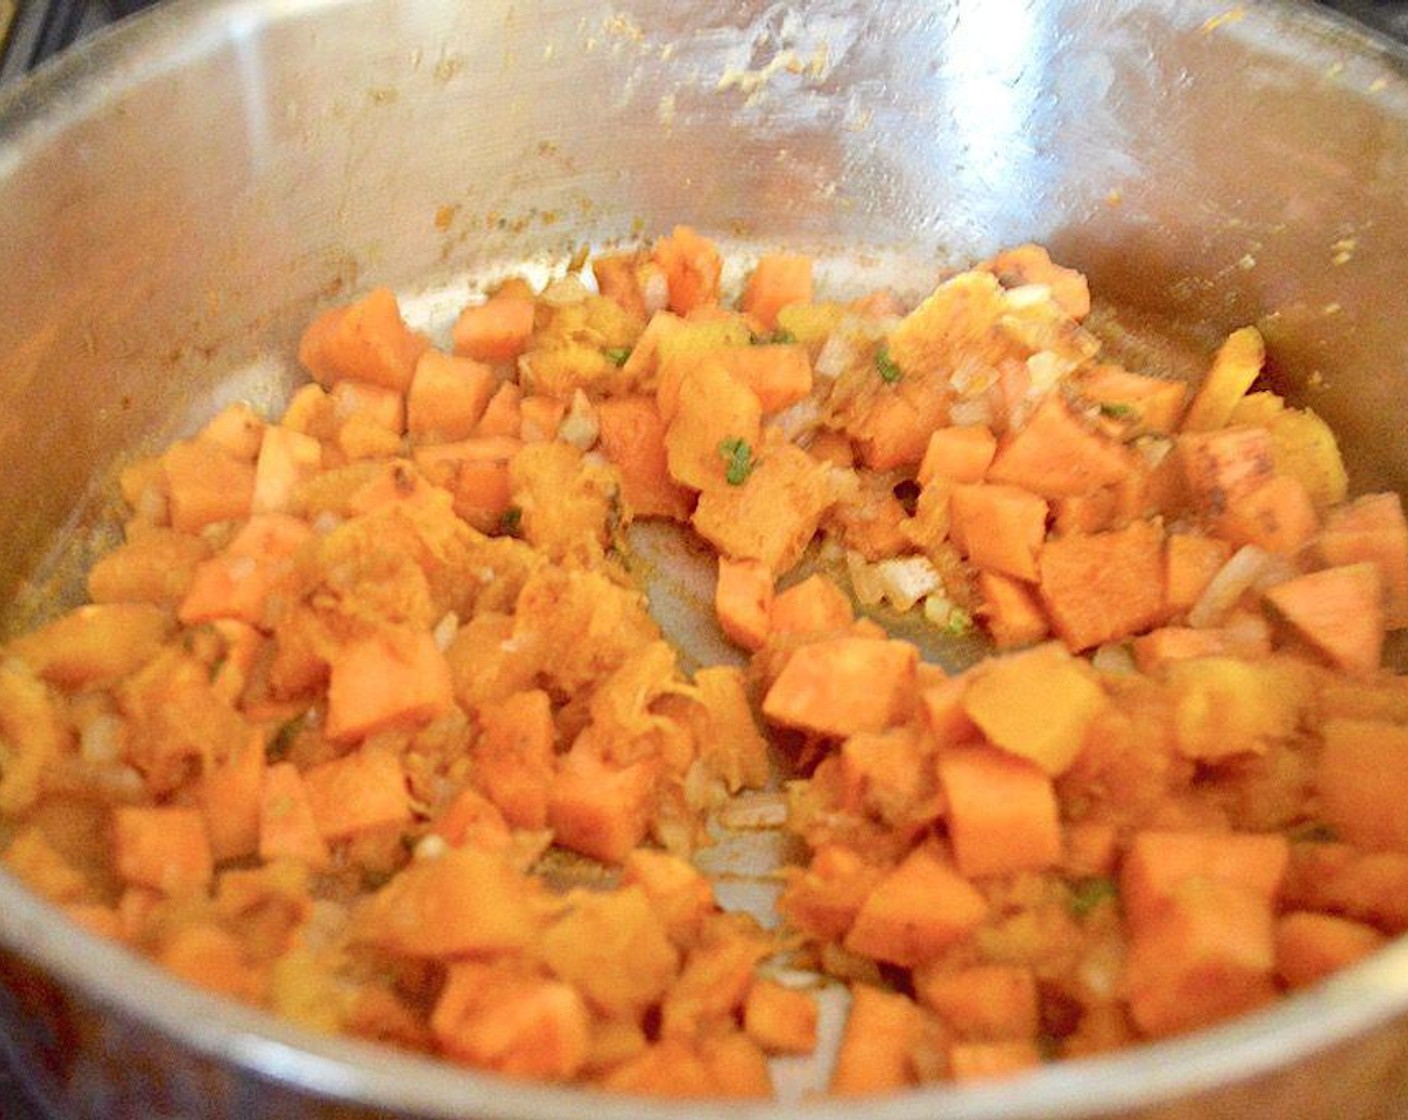 step 2 Once cooked, transfer to a plate and add the Butternut Squash (2 cups) and Sweet Potato (1) to the same pan to cook, stirring occasionally.